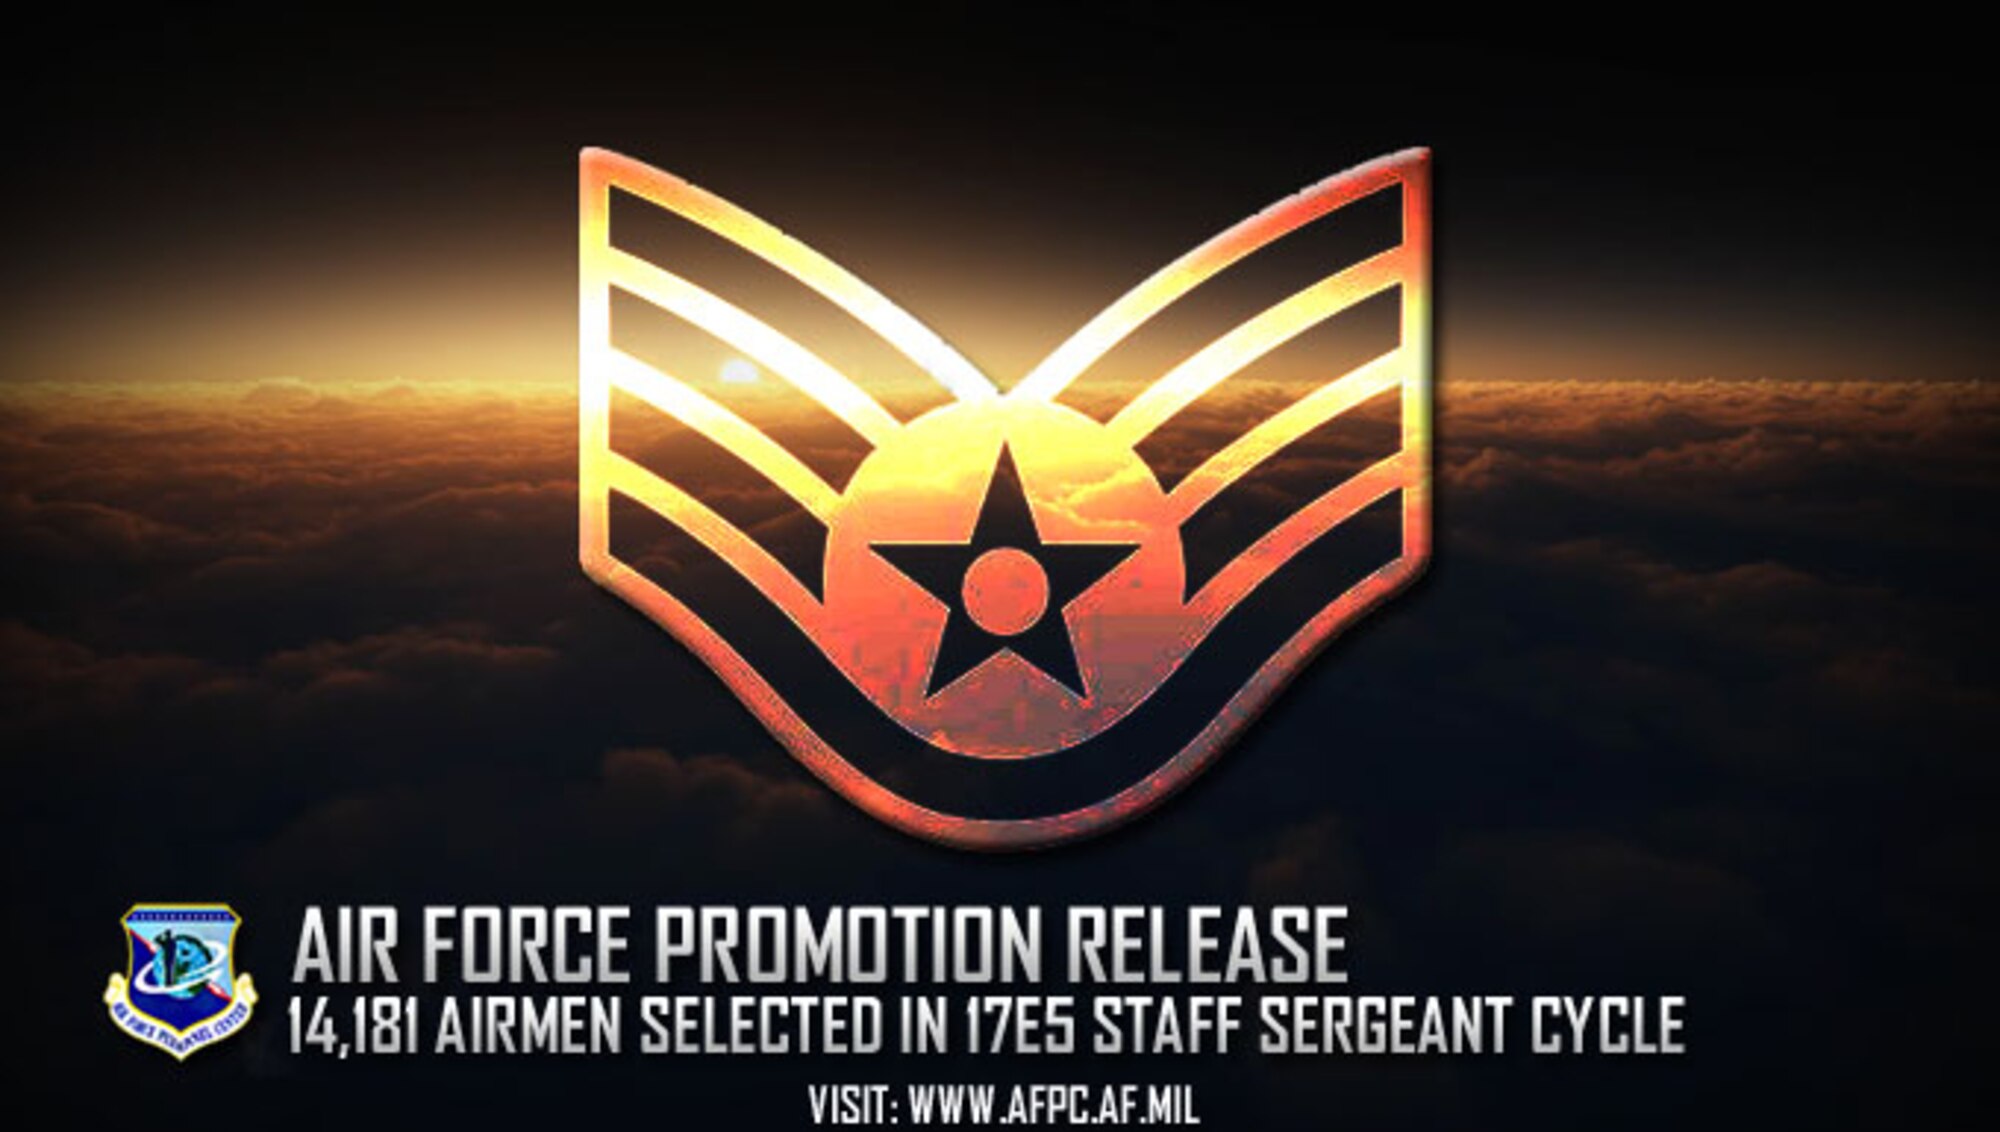 The Air Force announced 14,181 senior airmen, 44.31% of all eligible Airmen, were selected for promotion to staff sergeant, Aug. 24, 2017. At Shaw Air Force Base, S.C., 357 senior airmen were selected for promotion, including those assigned to geographically separated units. (U.S. Air Force graphic by Staff Sgt. Alexx Pons)